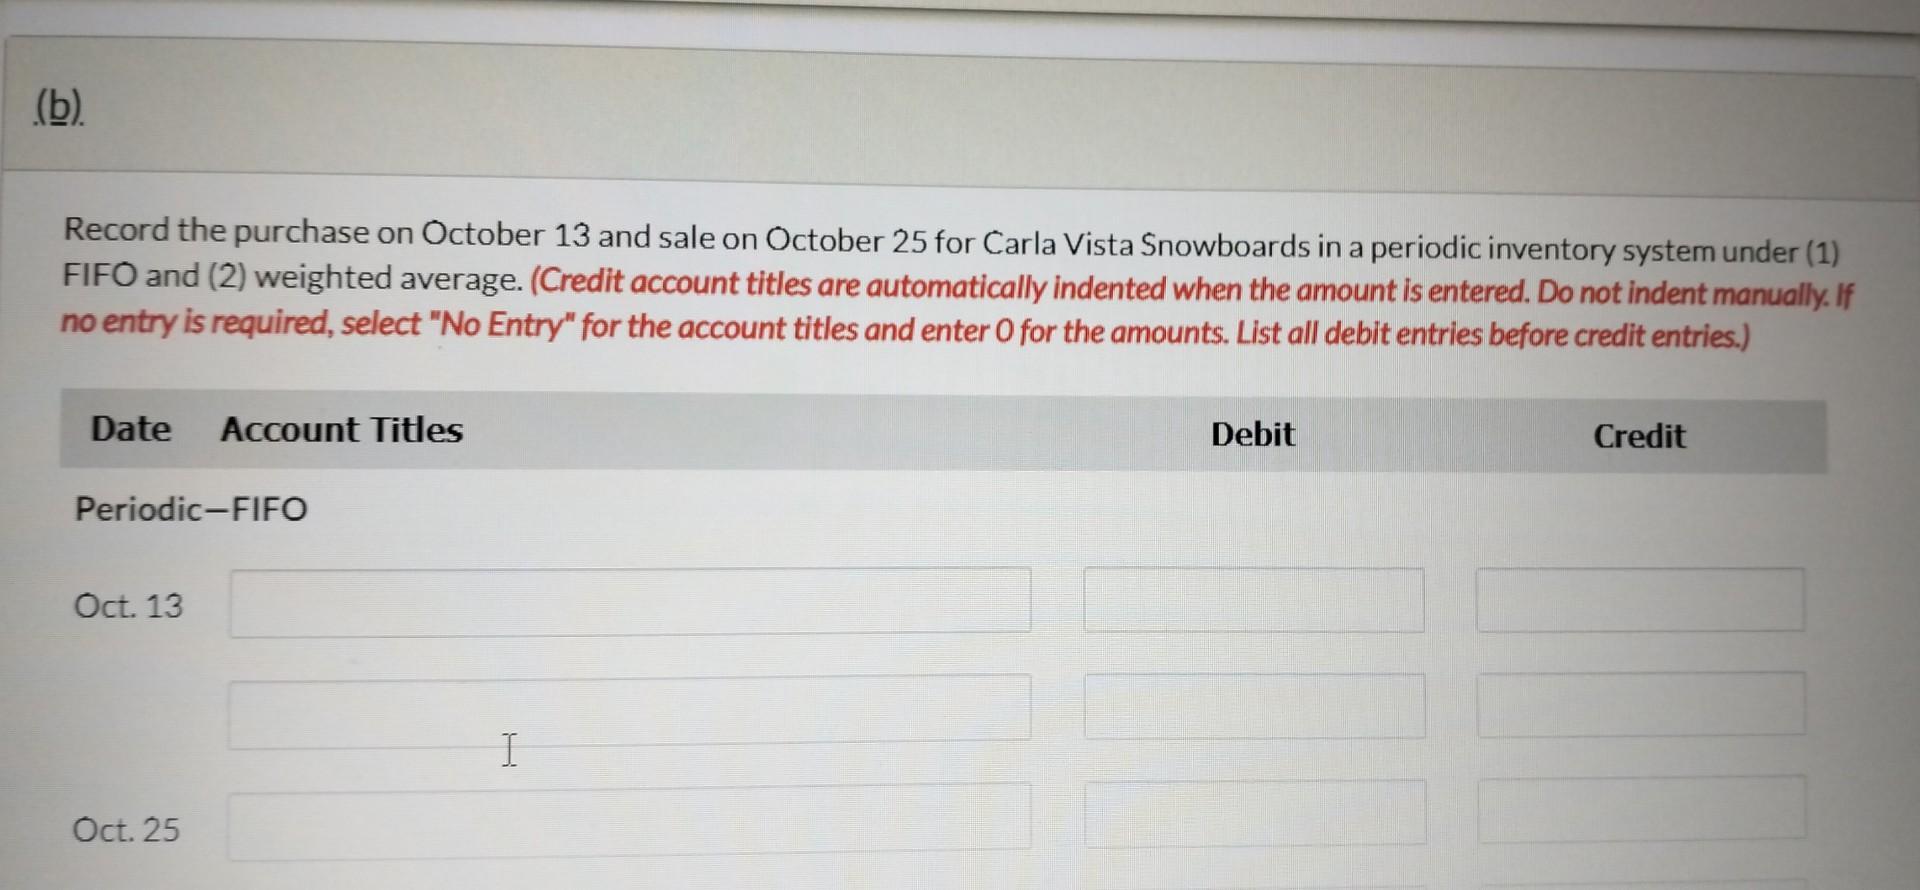 Record the purchase on October 13 and sale on October 25 for Carla Vista Snowboards in a periodic inventory system under (1)